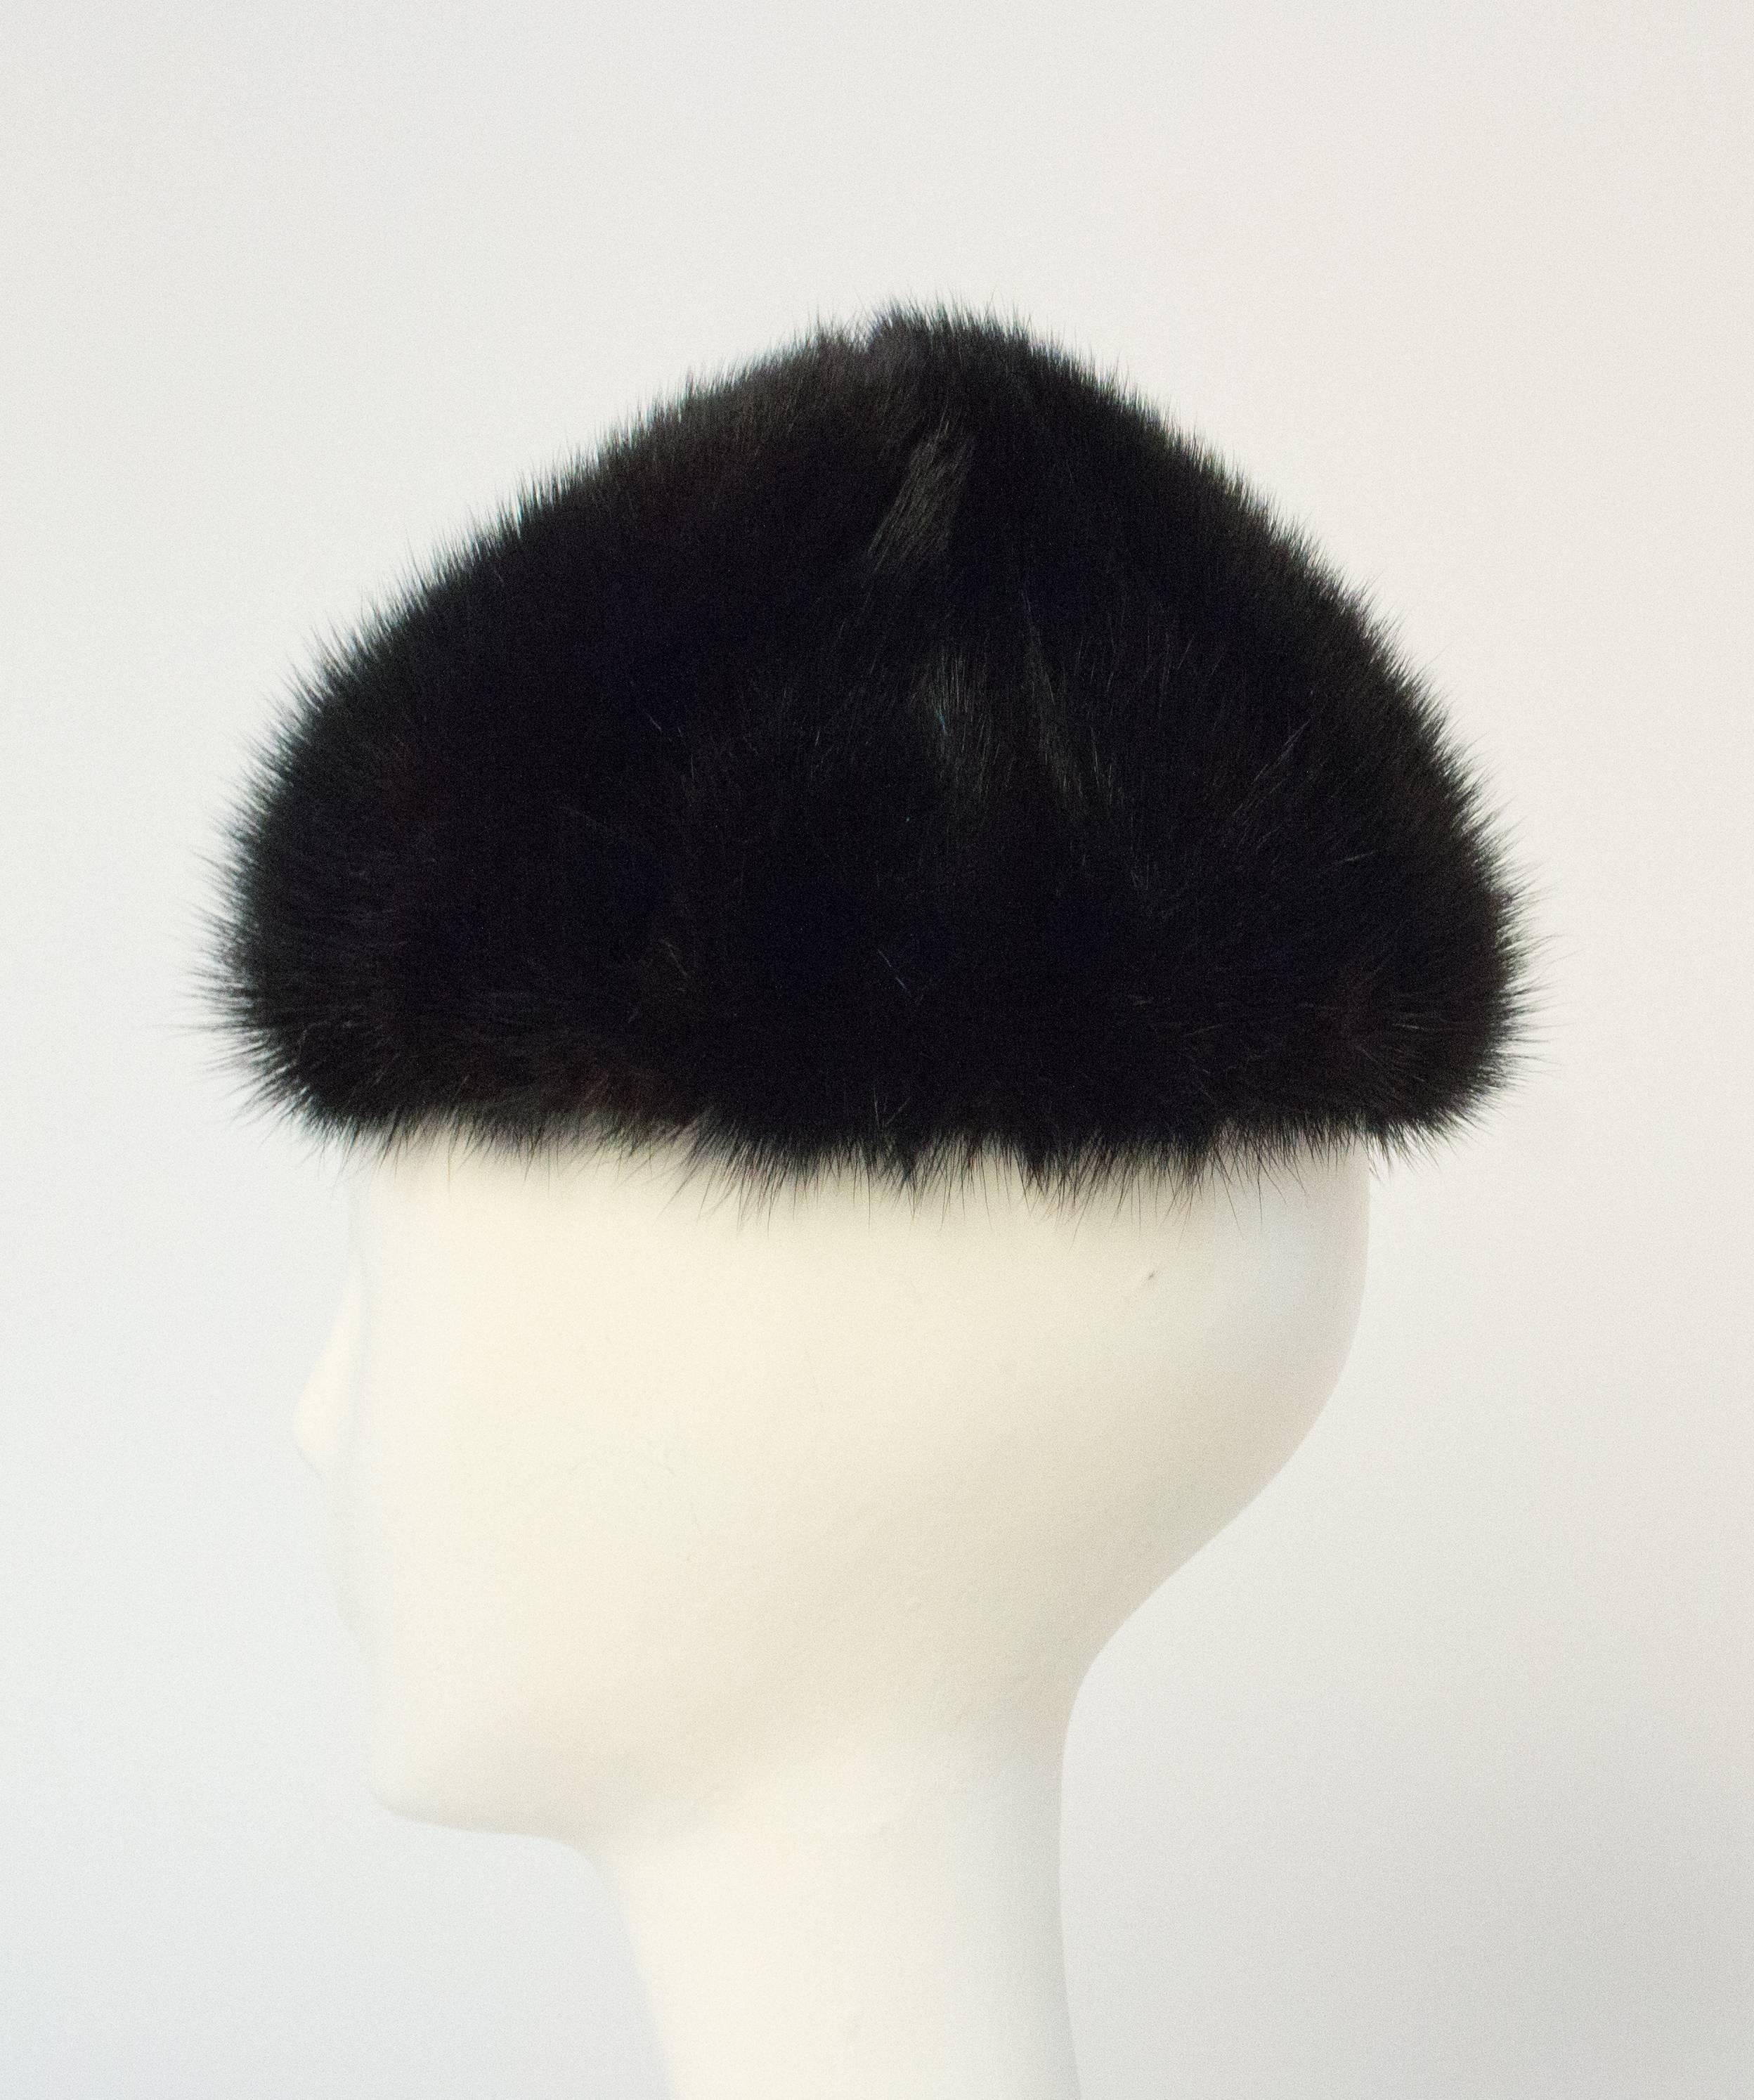 60s Black Mink Hat. Lined in grosgrain. Grosgrain interior hat band. Original combs. Ment to be worn on the back of the head. 